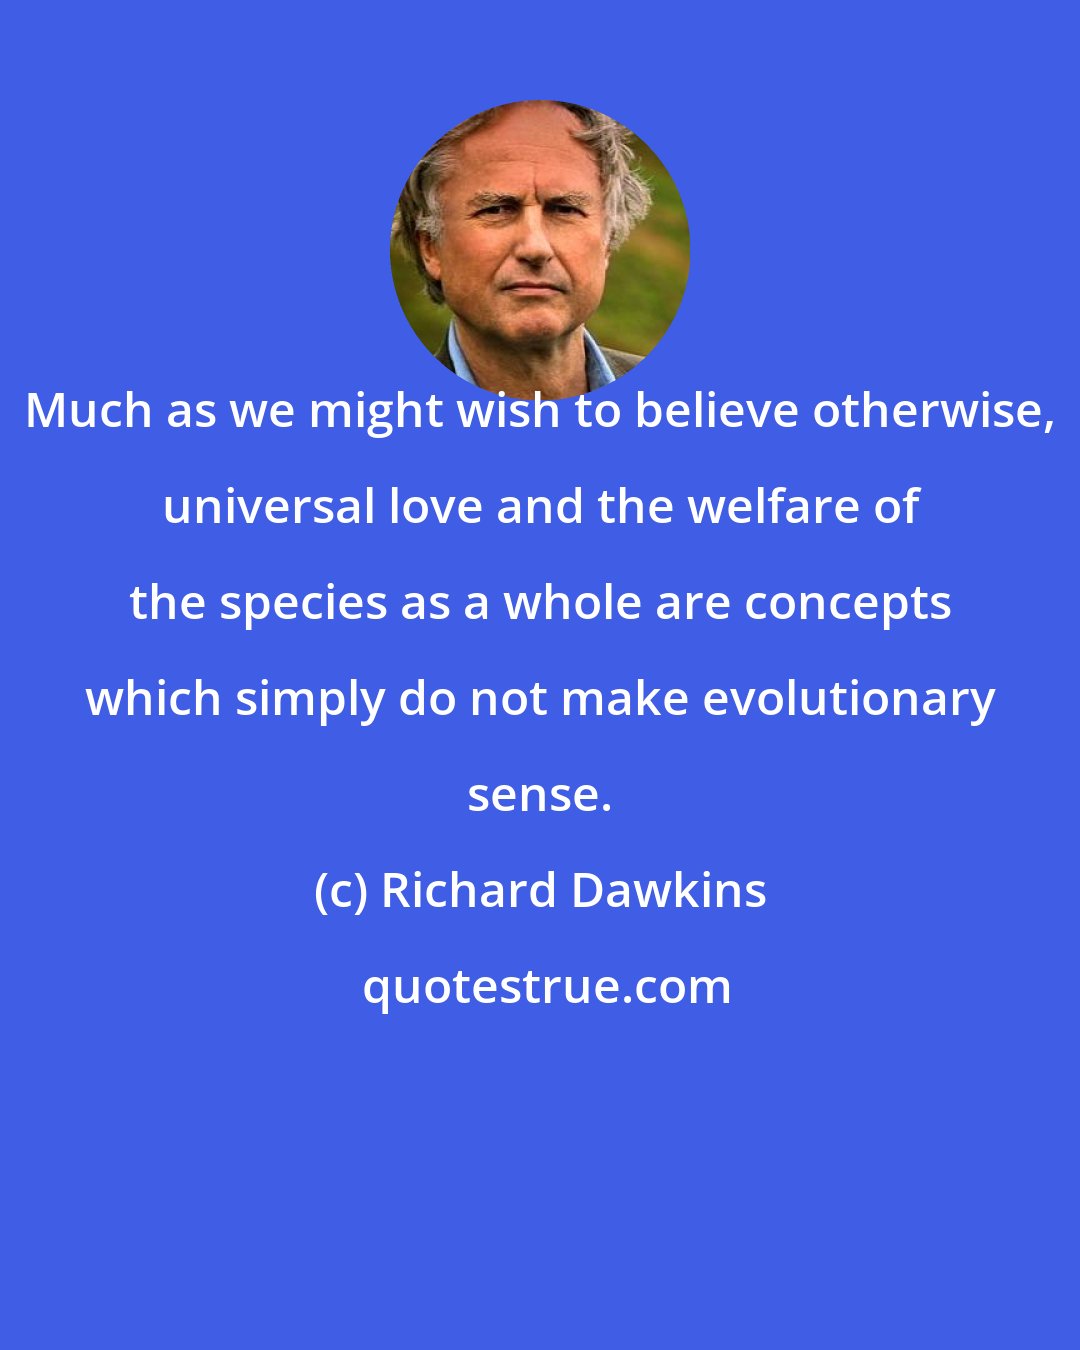 Richard Dawkins: Much as we might wish to believe otherwise, universal love and the welfare of the species as a whole are concepts which simply do not make evolutionary sense.